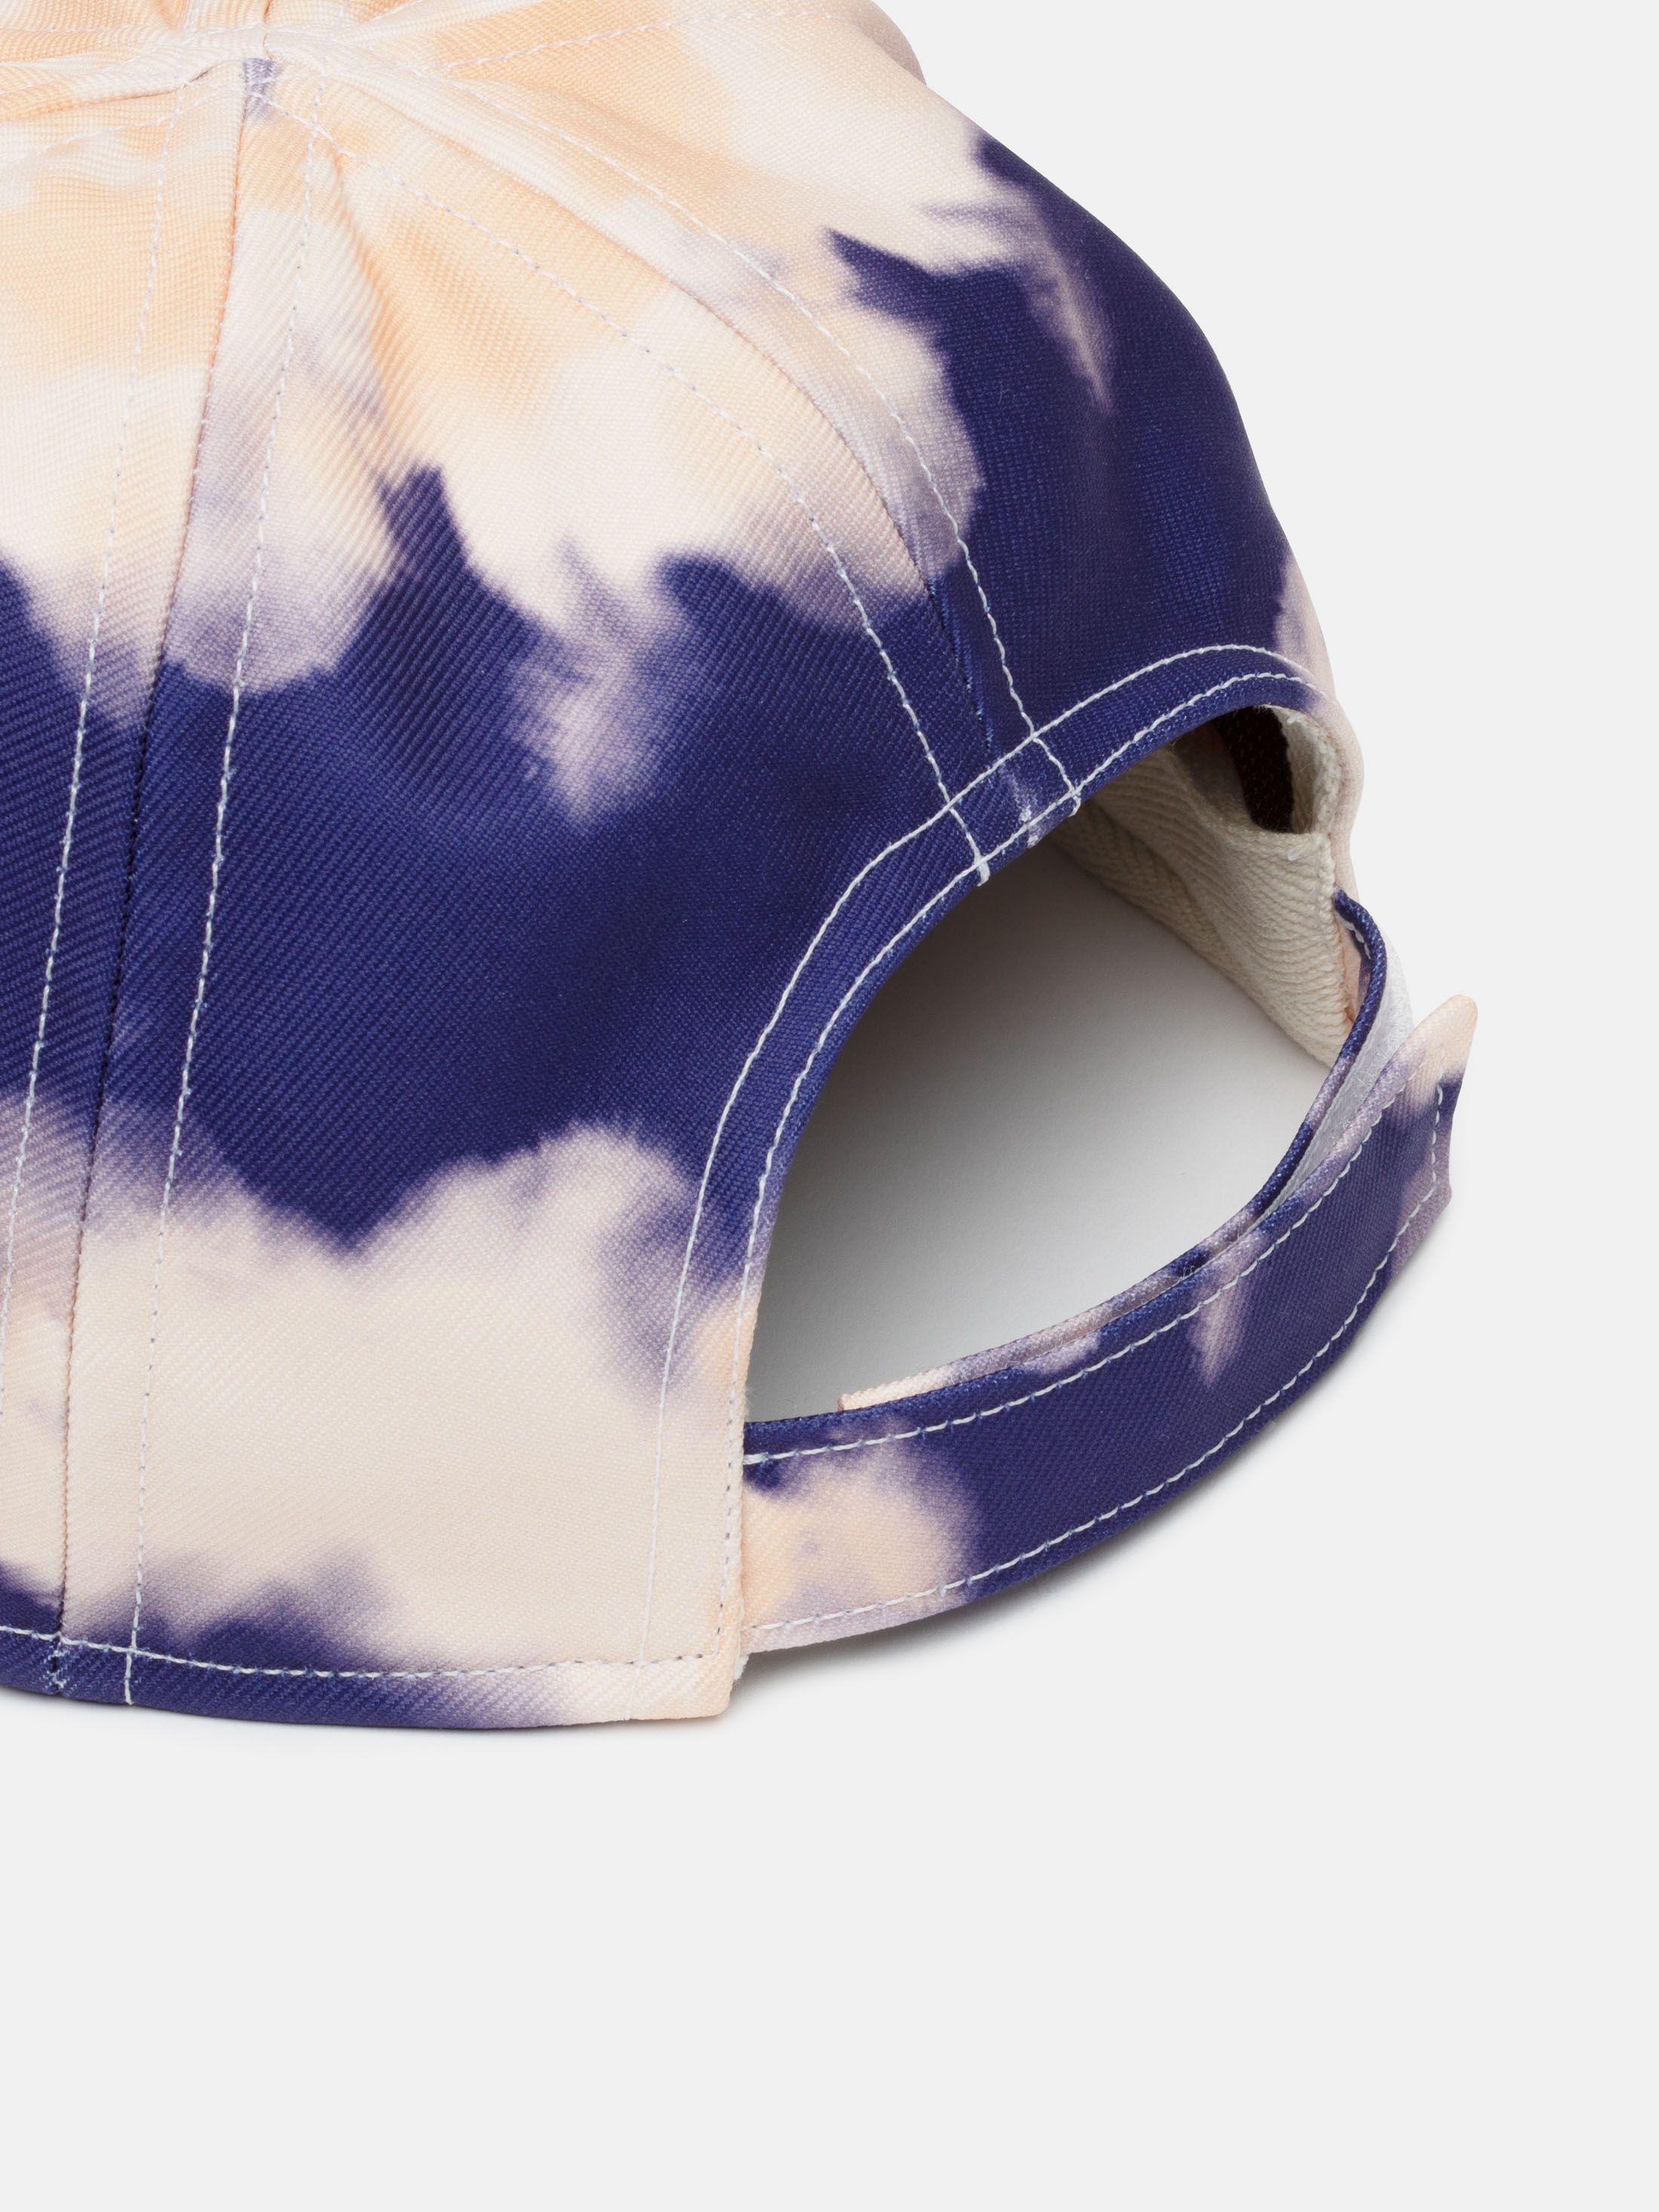 design your own baseball cap with prints or logos